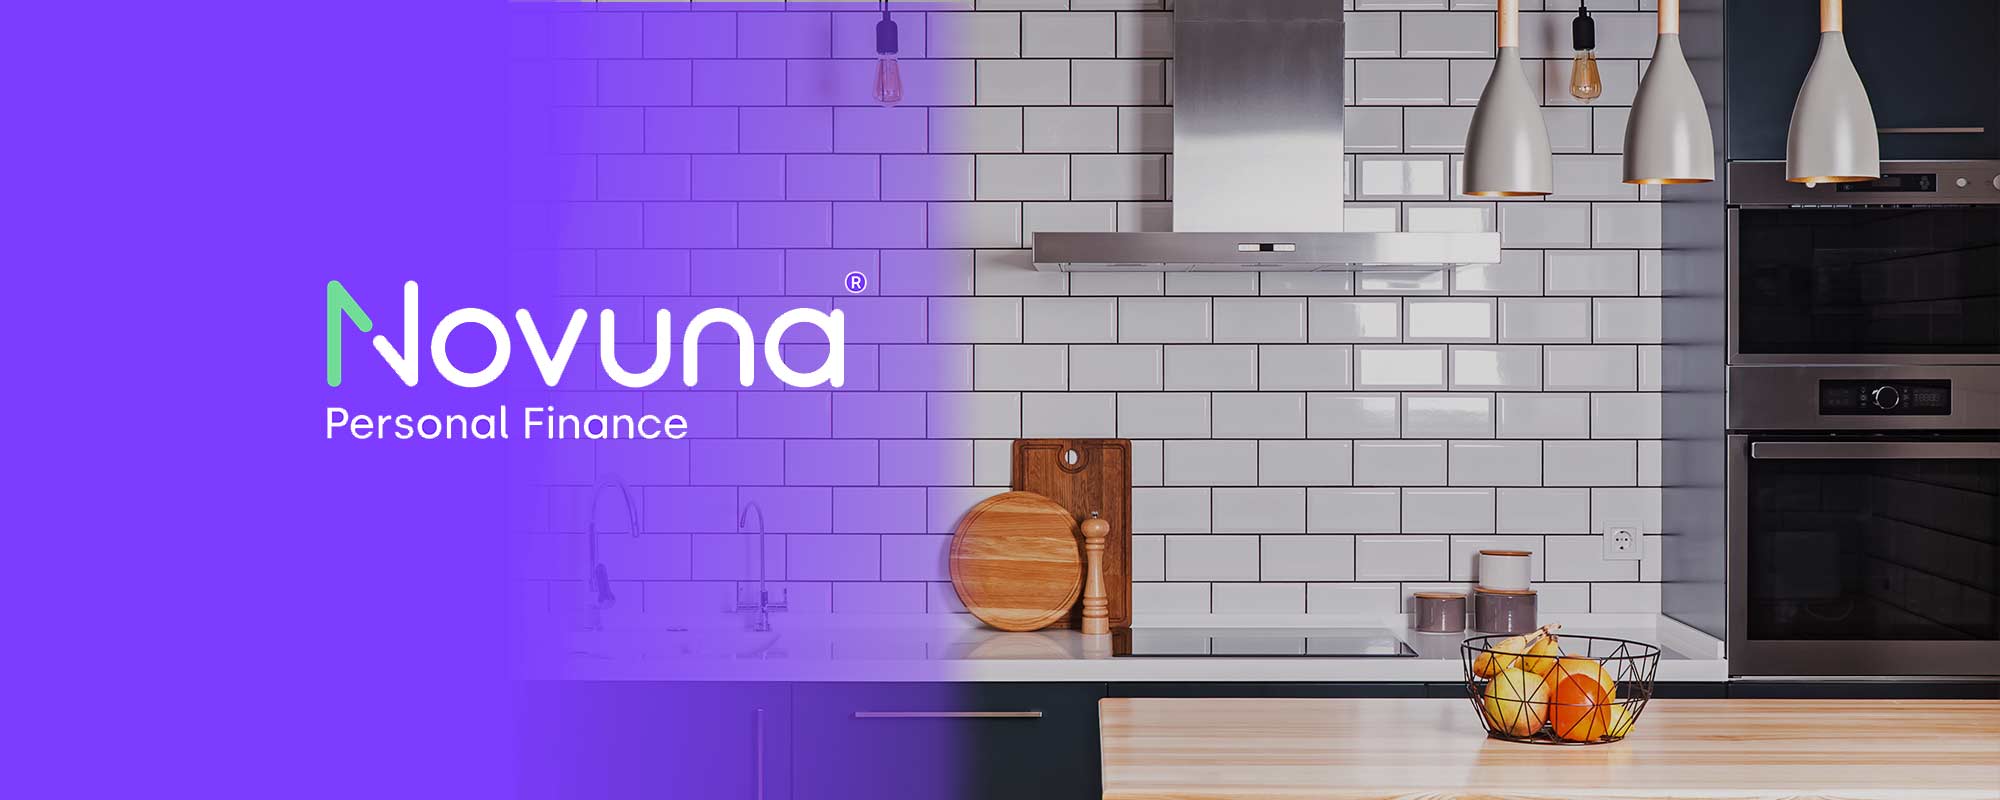 novuna finance payment option available for orders over £556